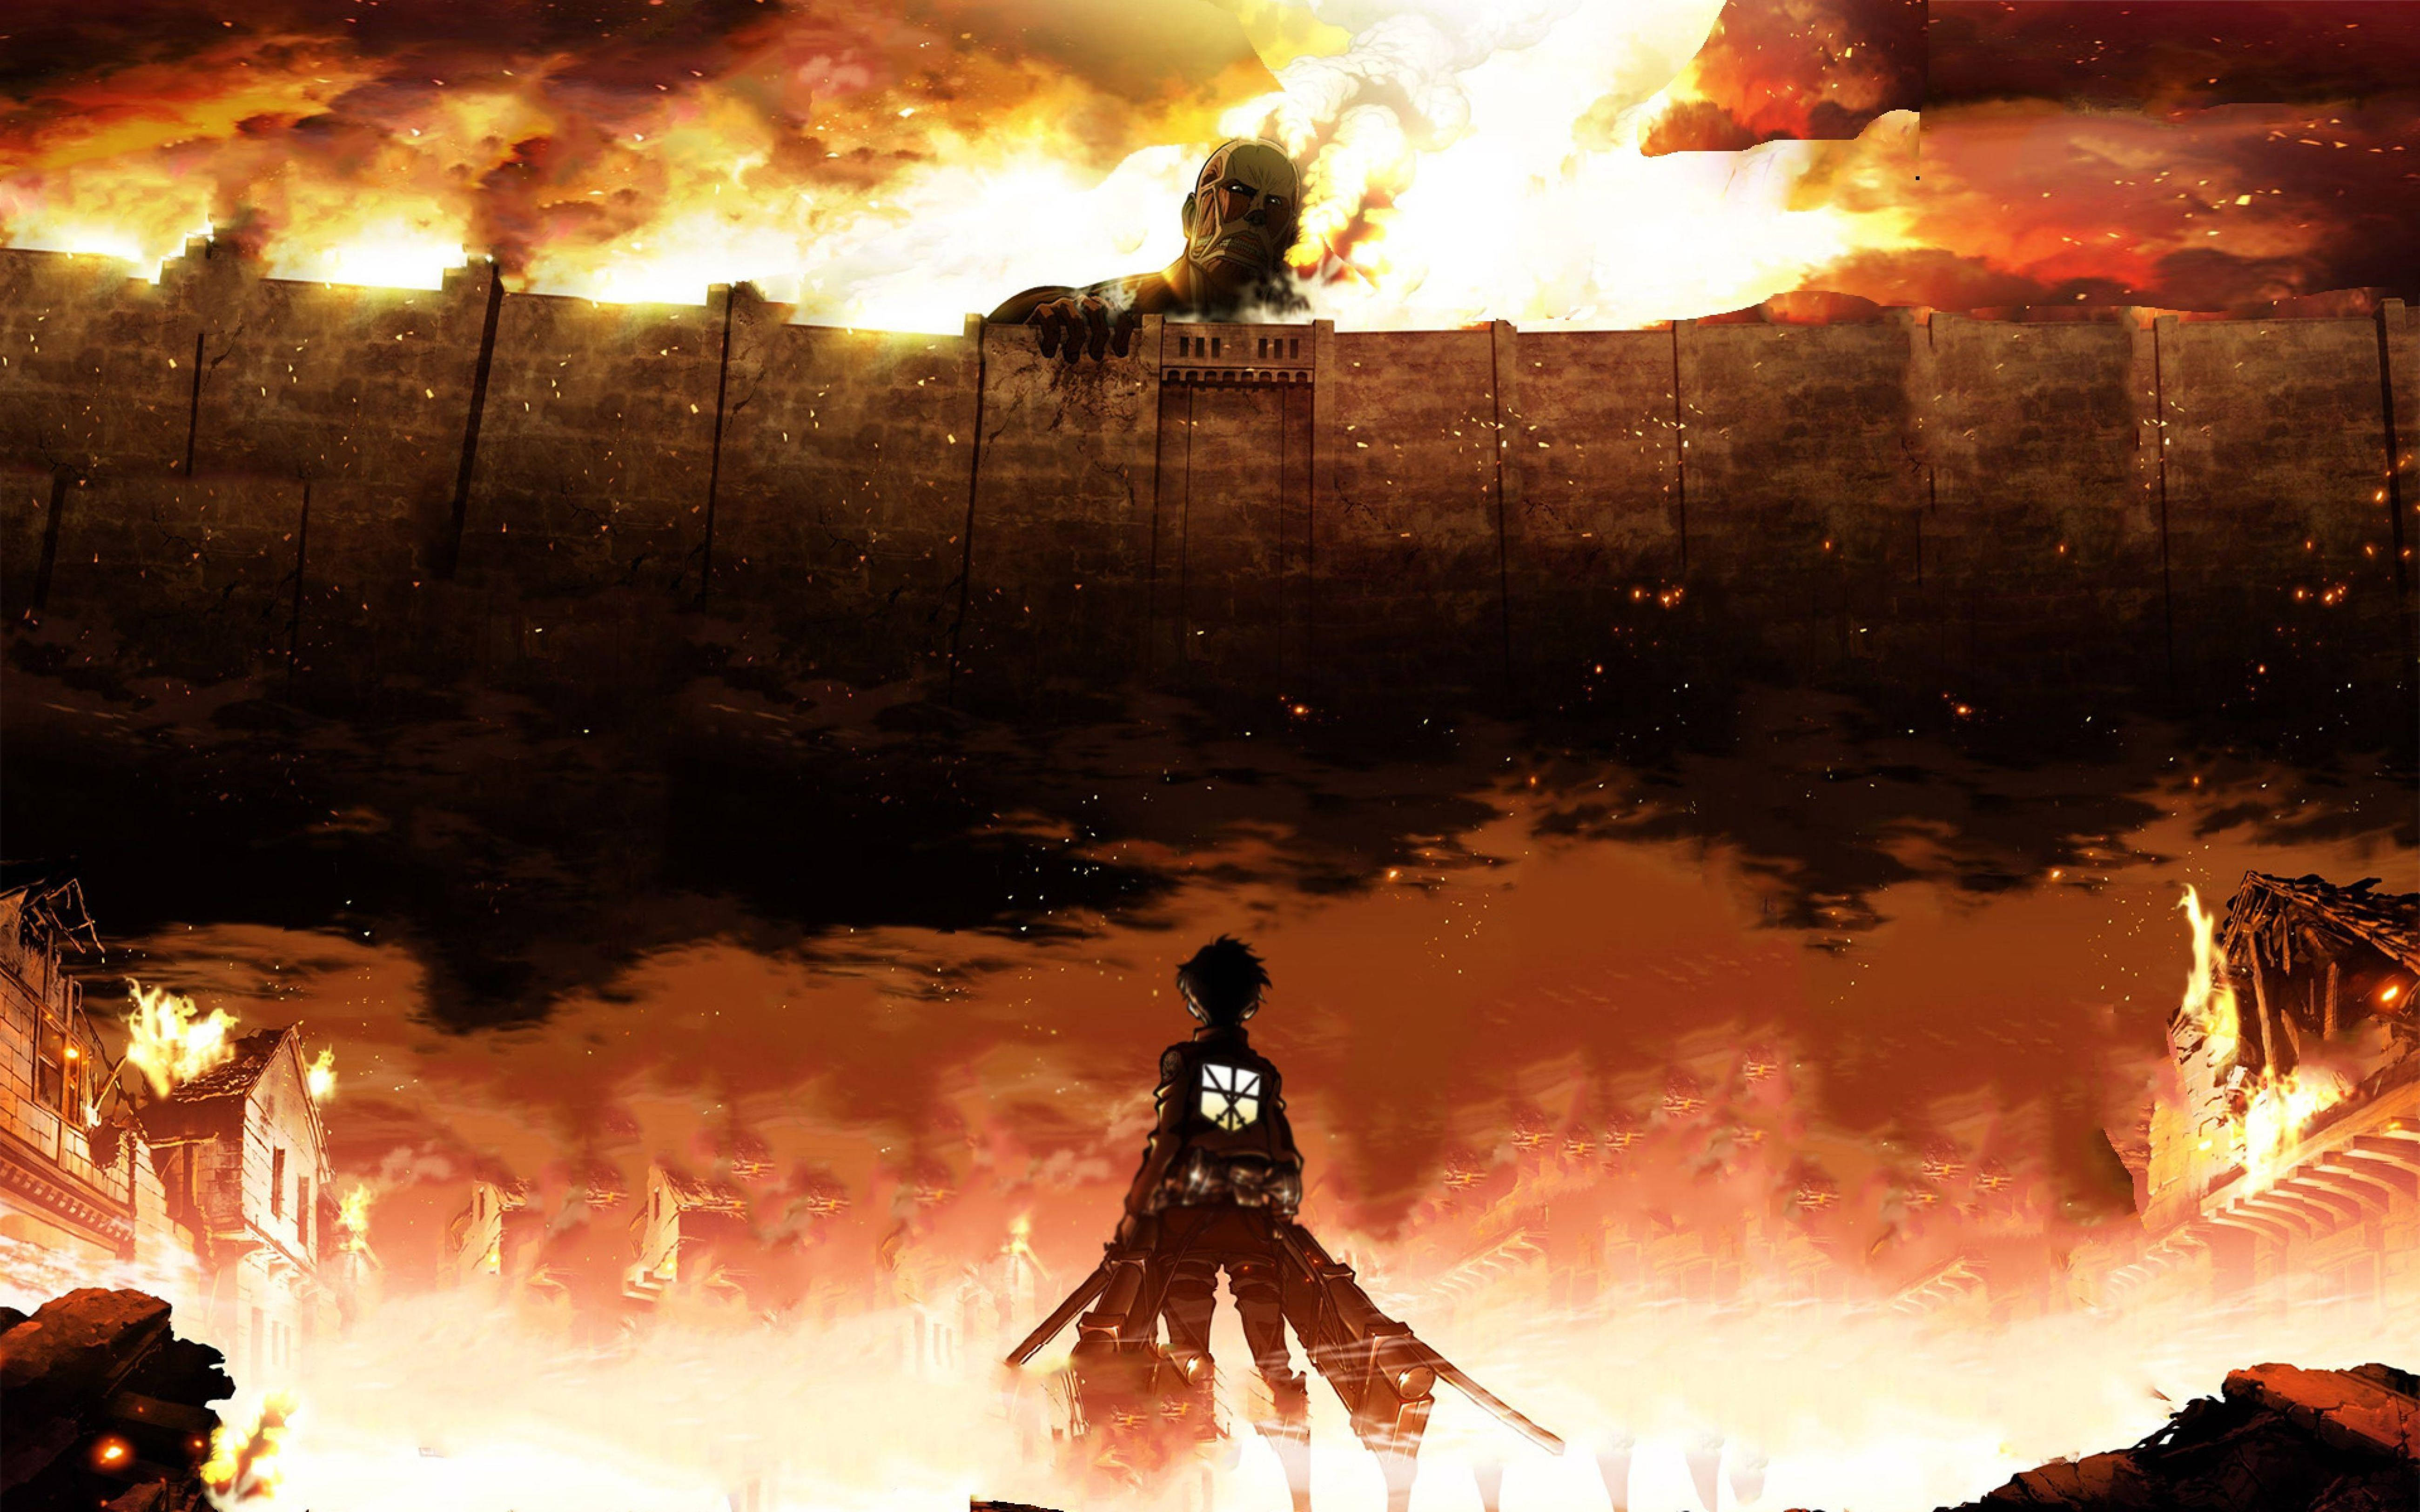 Intense Moment From Attack On Titans 4k, Featuring Eren In Steam Titan Form Wallpaper